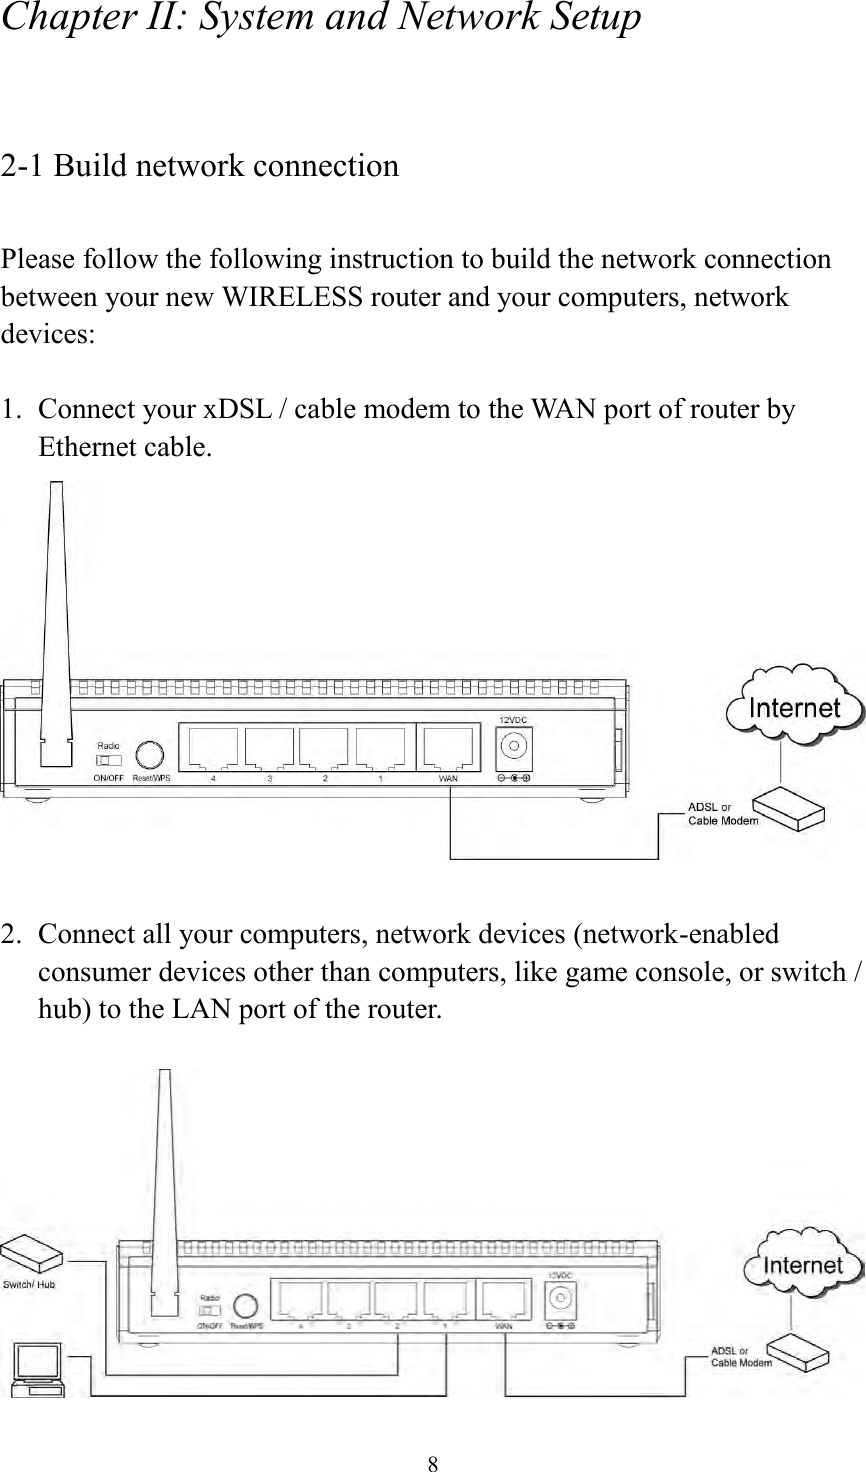  8 Chapter II: System and Network Setup  2-1 Build network connection  Please follow the following instruction to build the network connection between your new WIRELESS router and your computers, network devices:  1. Connect your xDSL / cable modem to the WAN port of router by Ethernet cable.     2. Connect all your computers, network devices (network-enabled consumer devices other than computers, like game console, or switch / hub) to the LAN port of the router.   